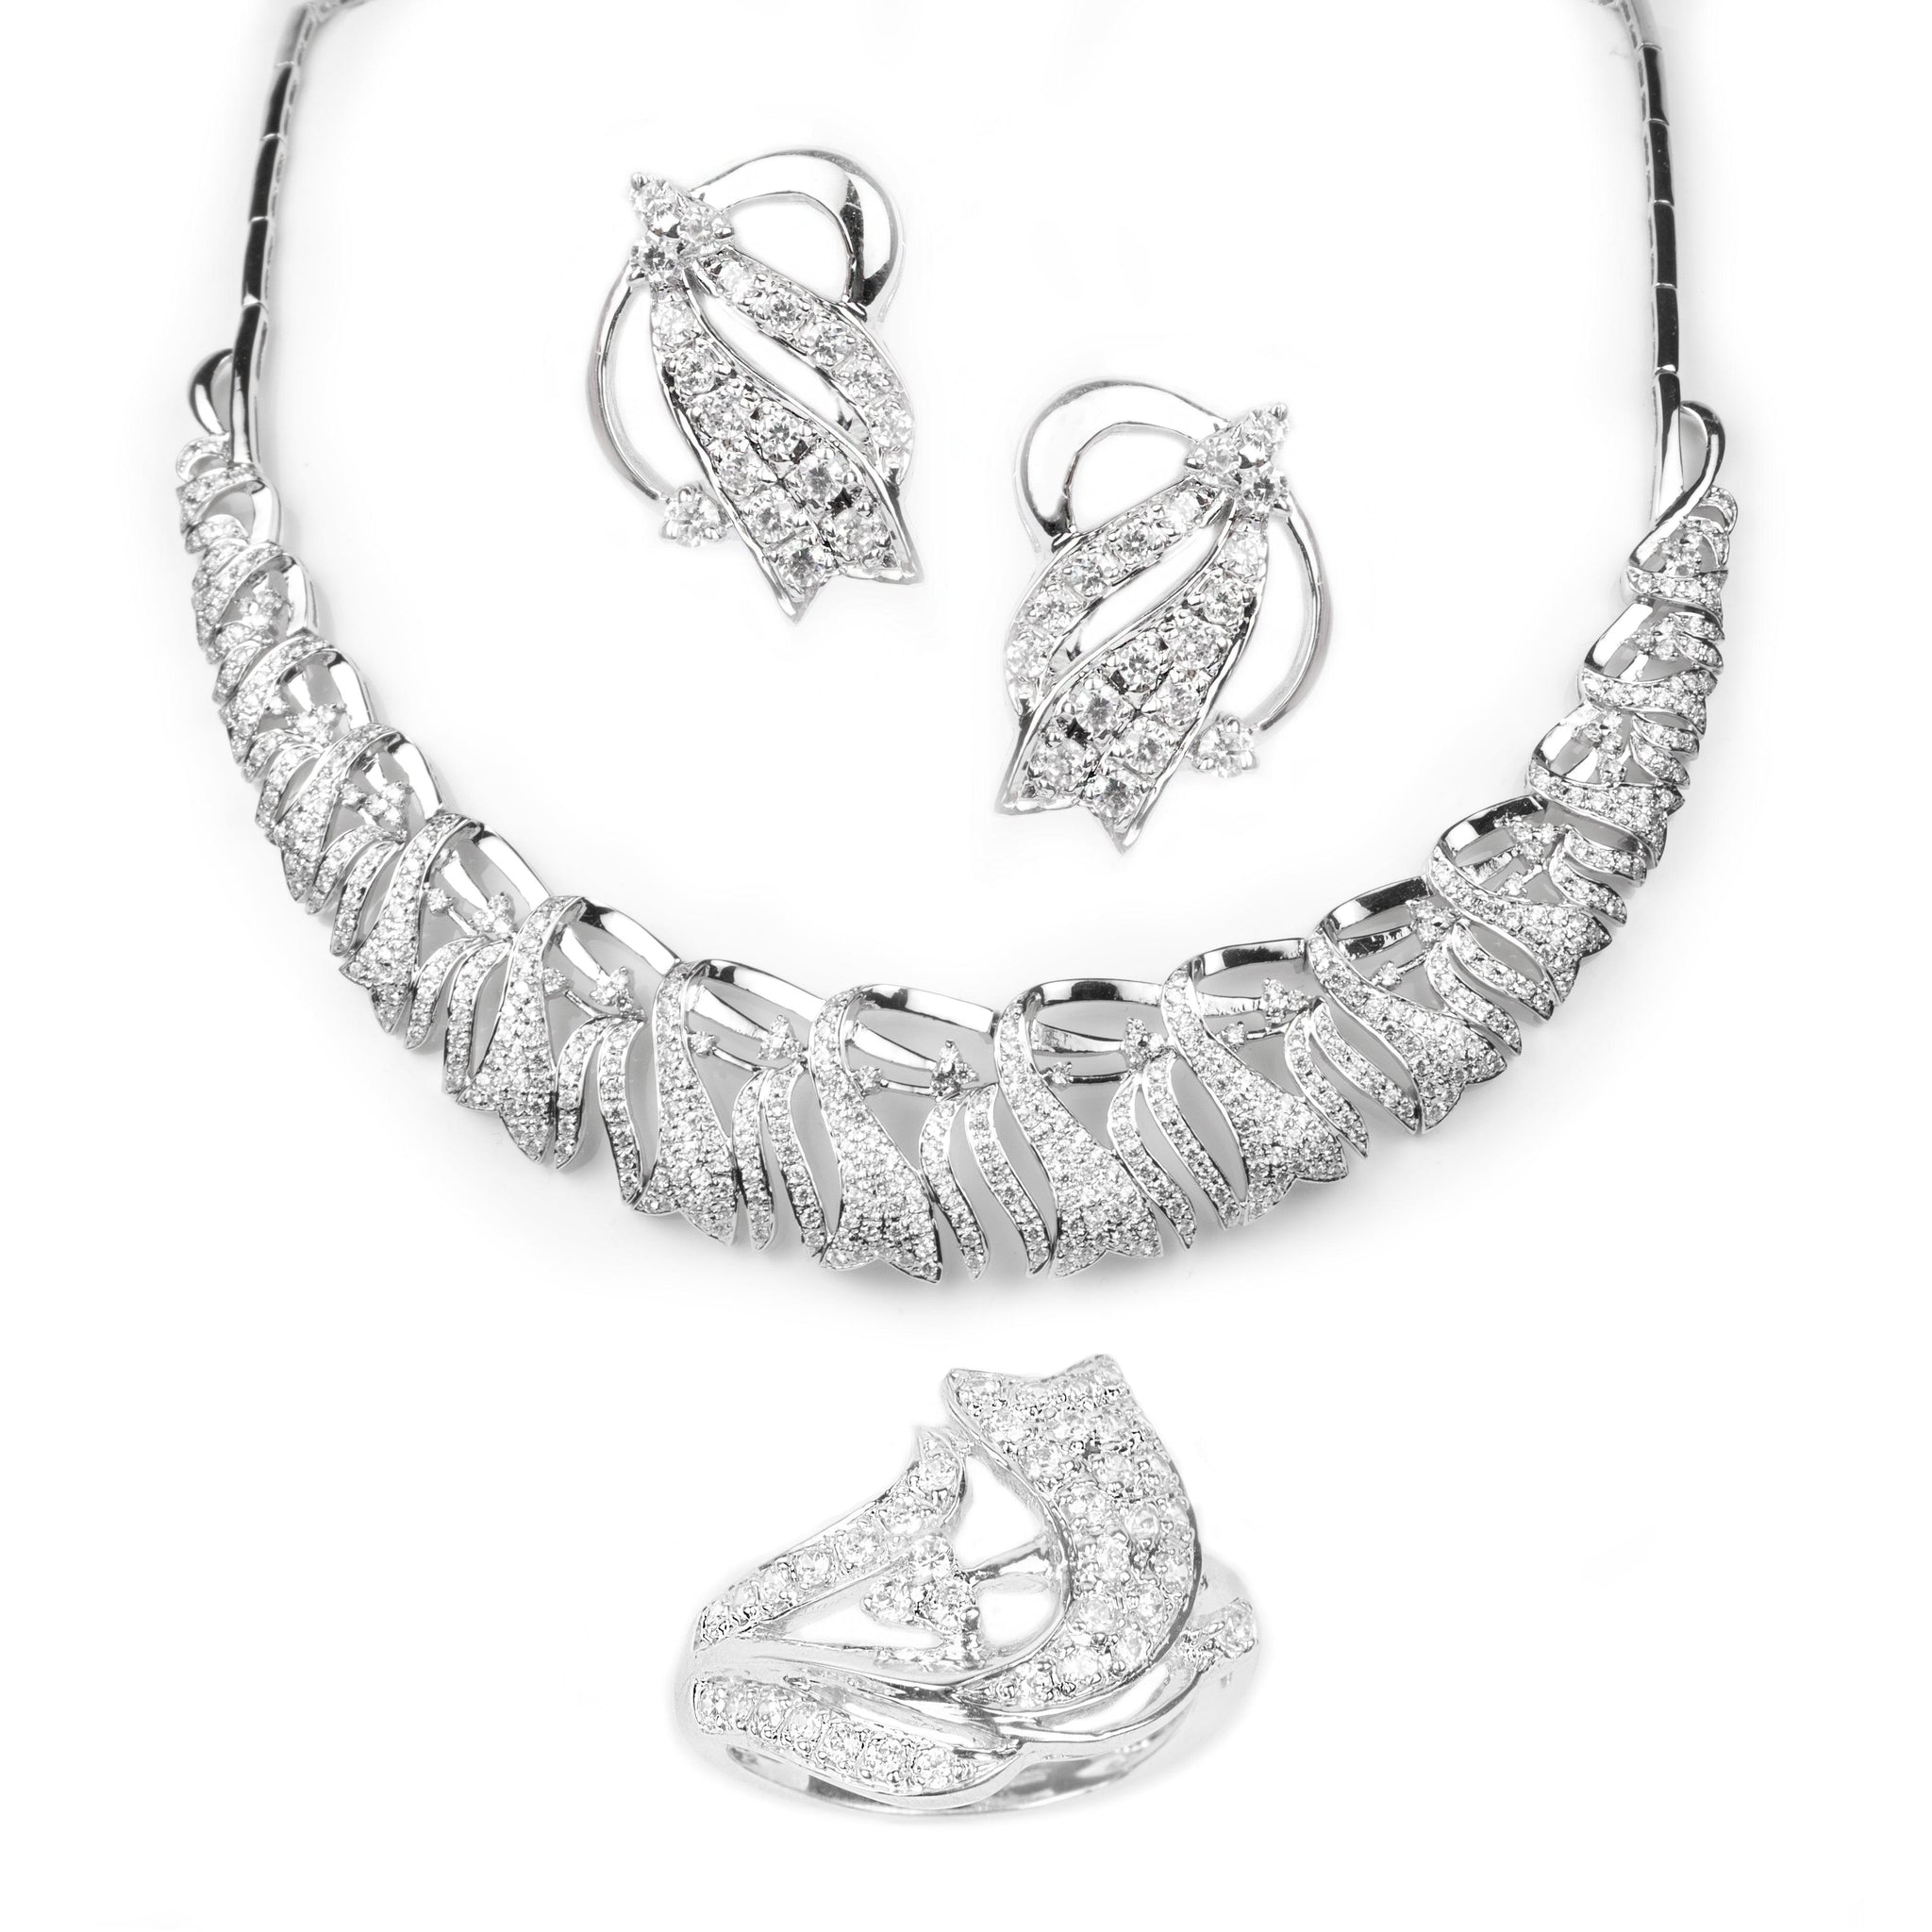 18ct White Gold Necklace, Earrings & Ring set with Cubic Zirconia stones (59.1g) N&E&LR-5231